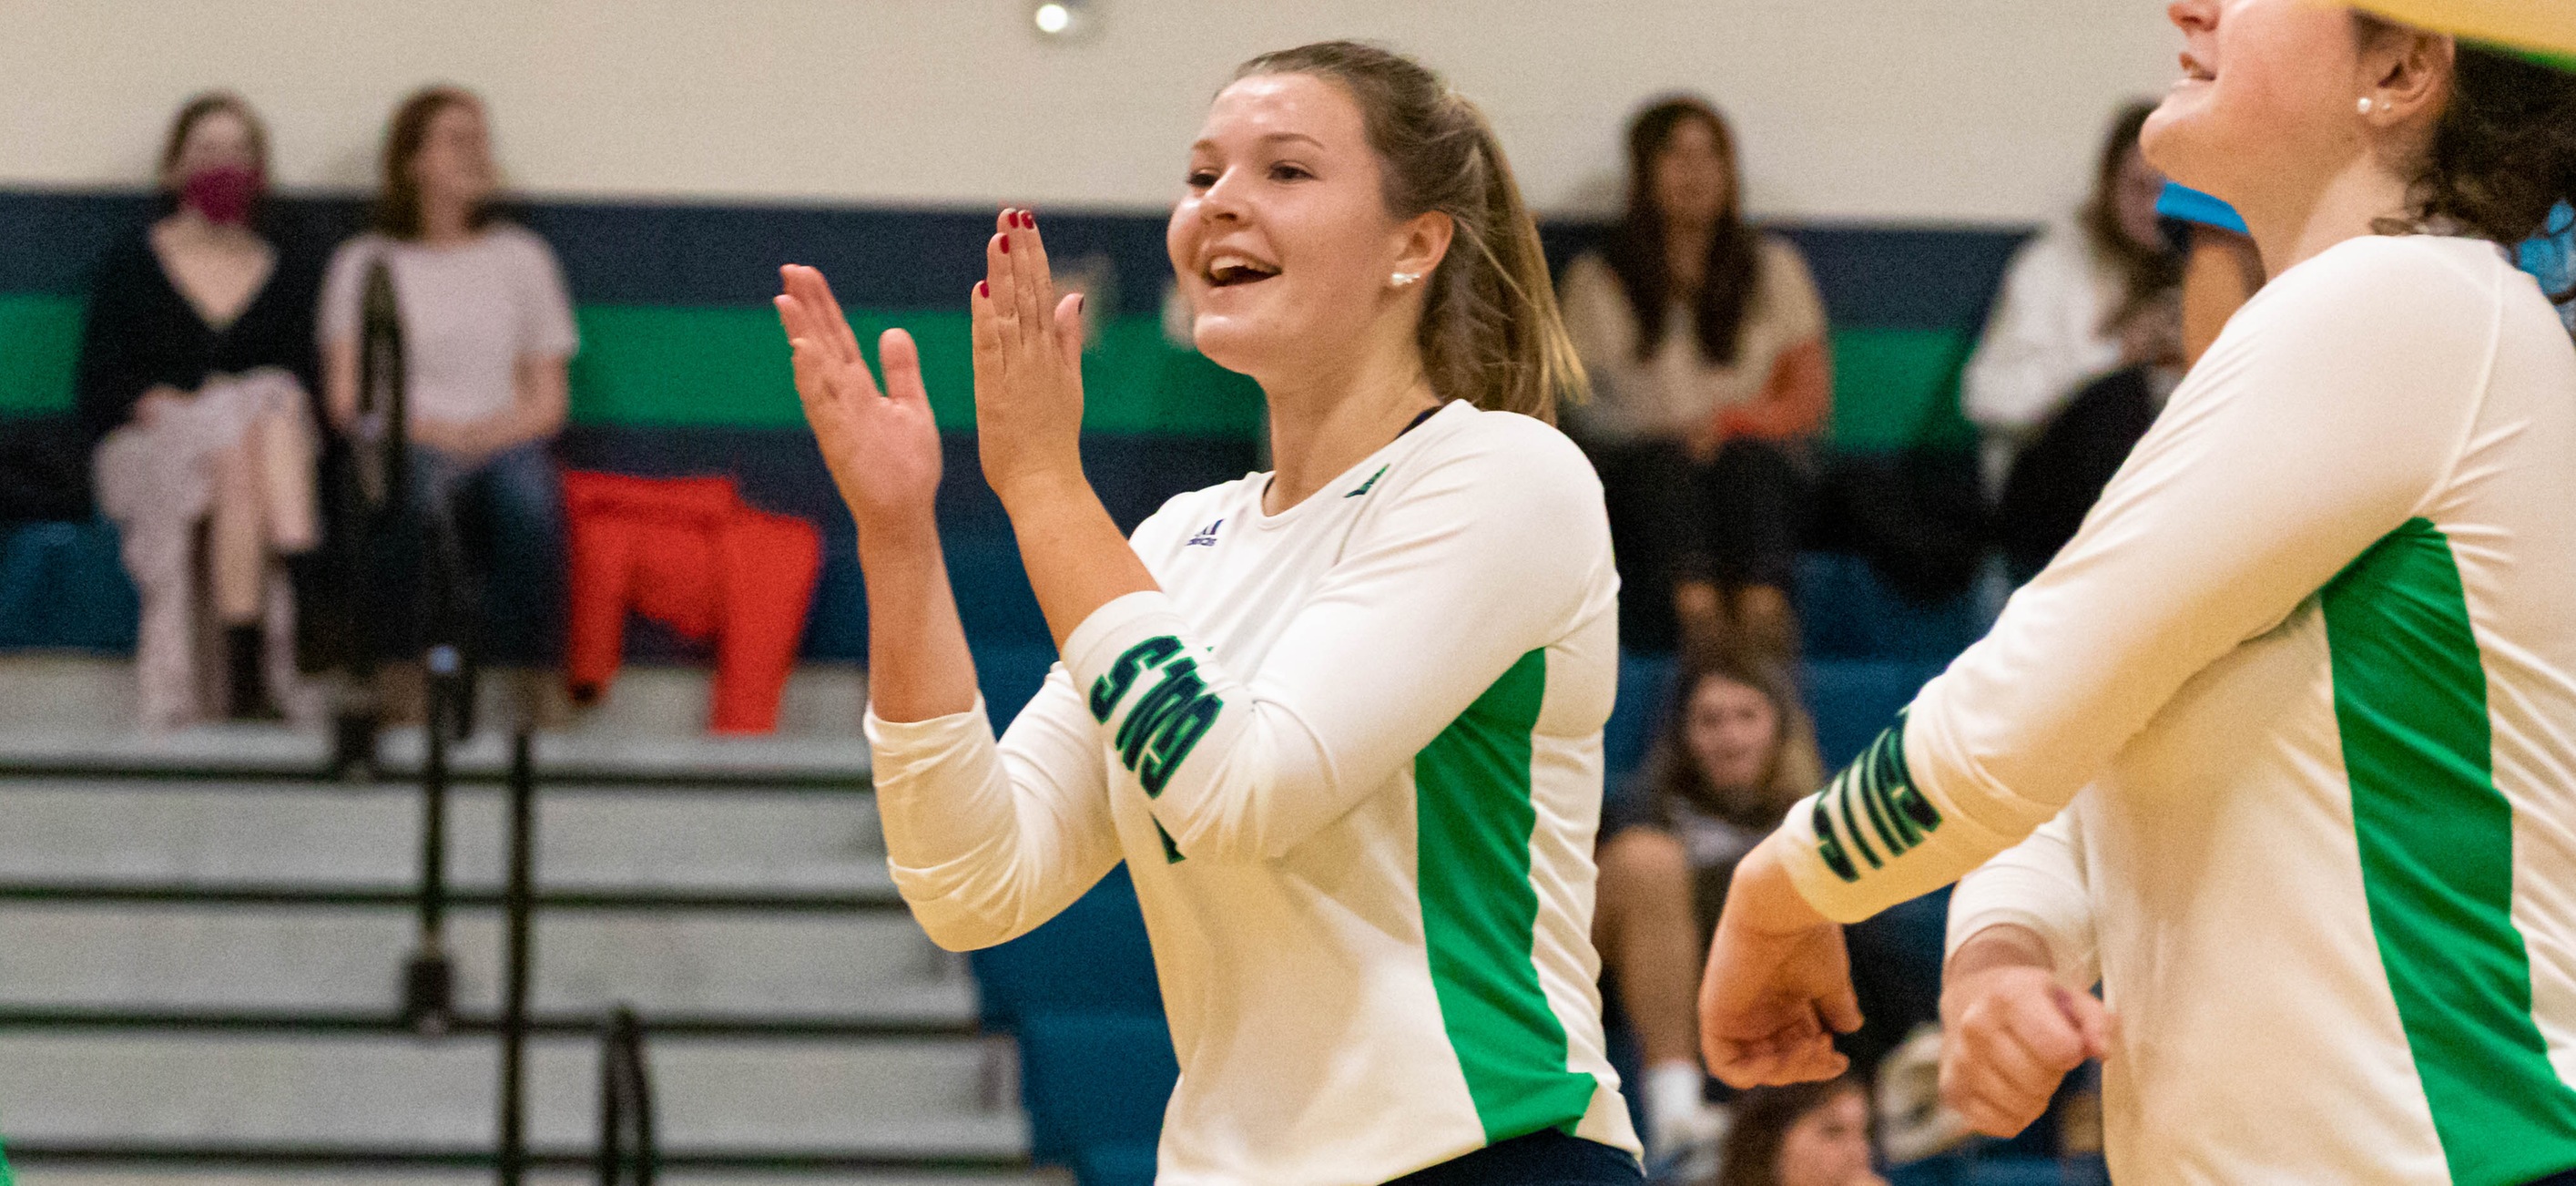 Women’s Volleyball Sweeps Western New England, 3-0